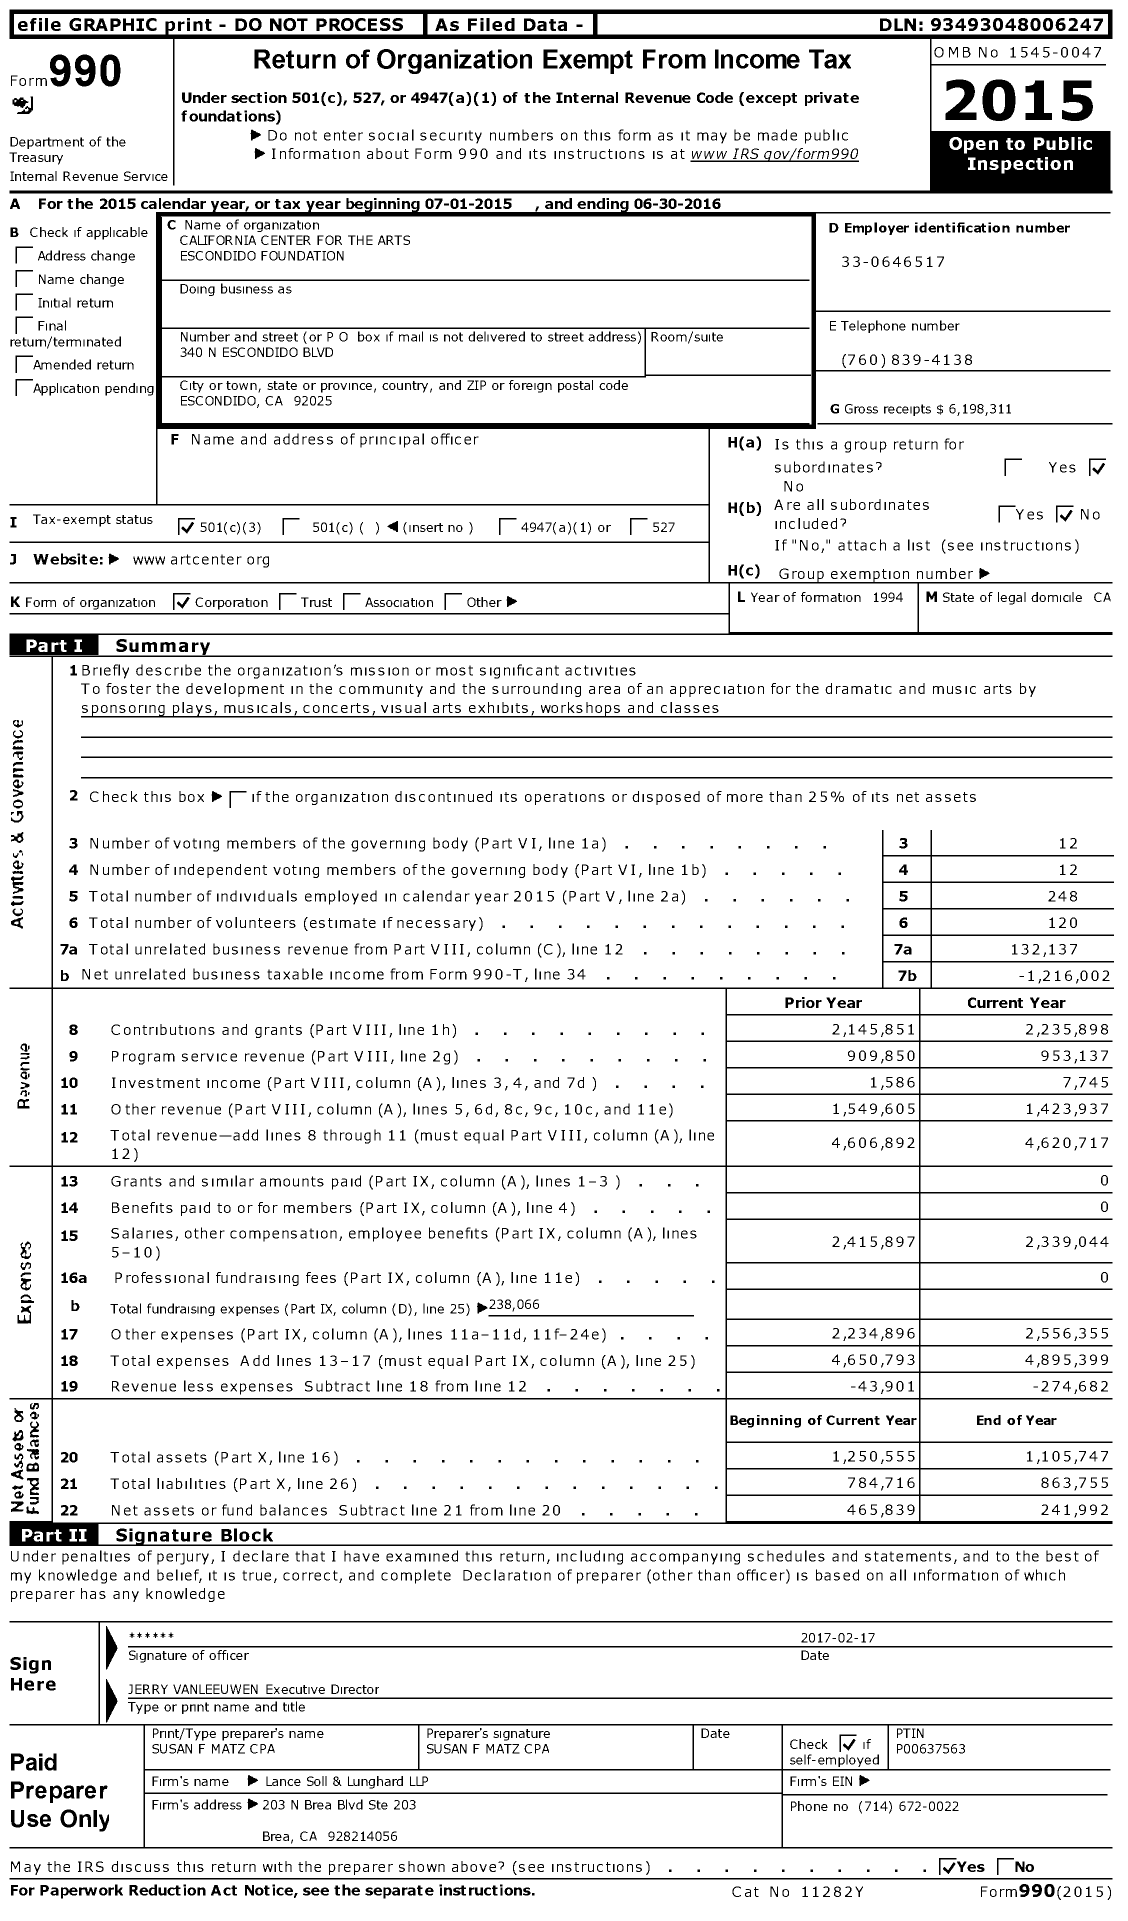 Image of first page of 2015 Form 990 for California Center for the Arts Escondido Foundation